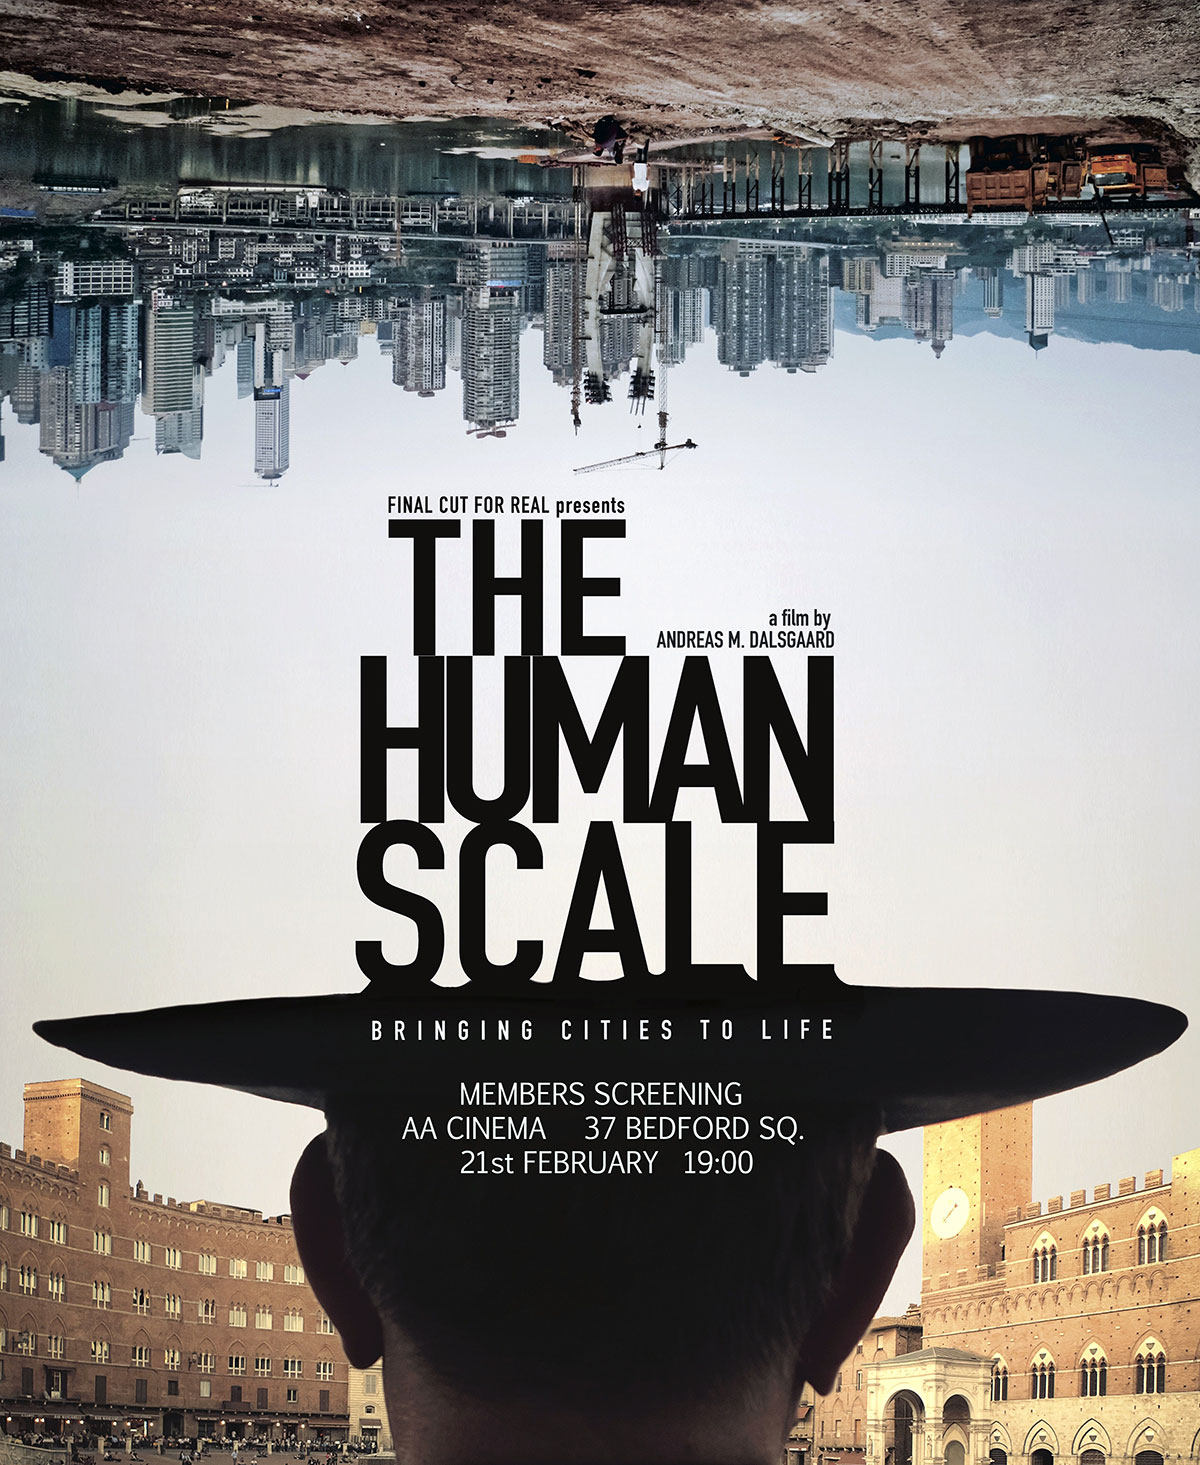 Special Members' Screening of The Human Scale